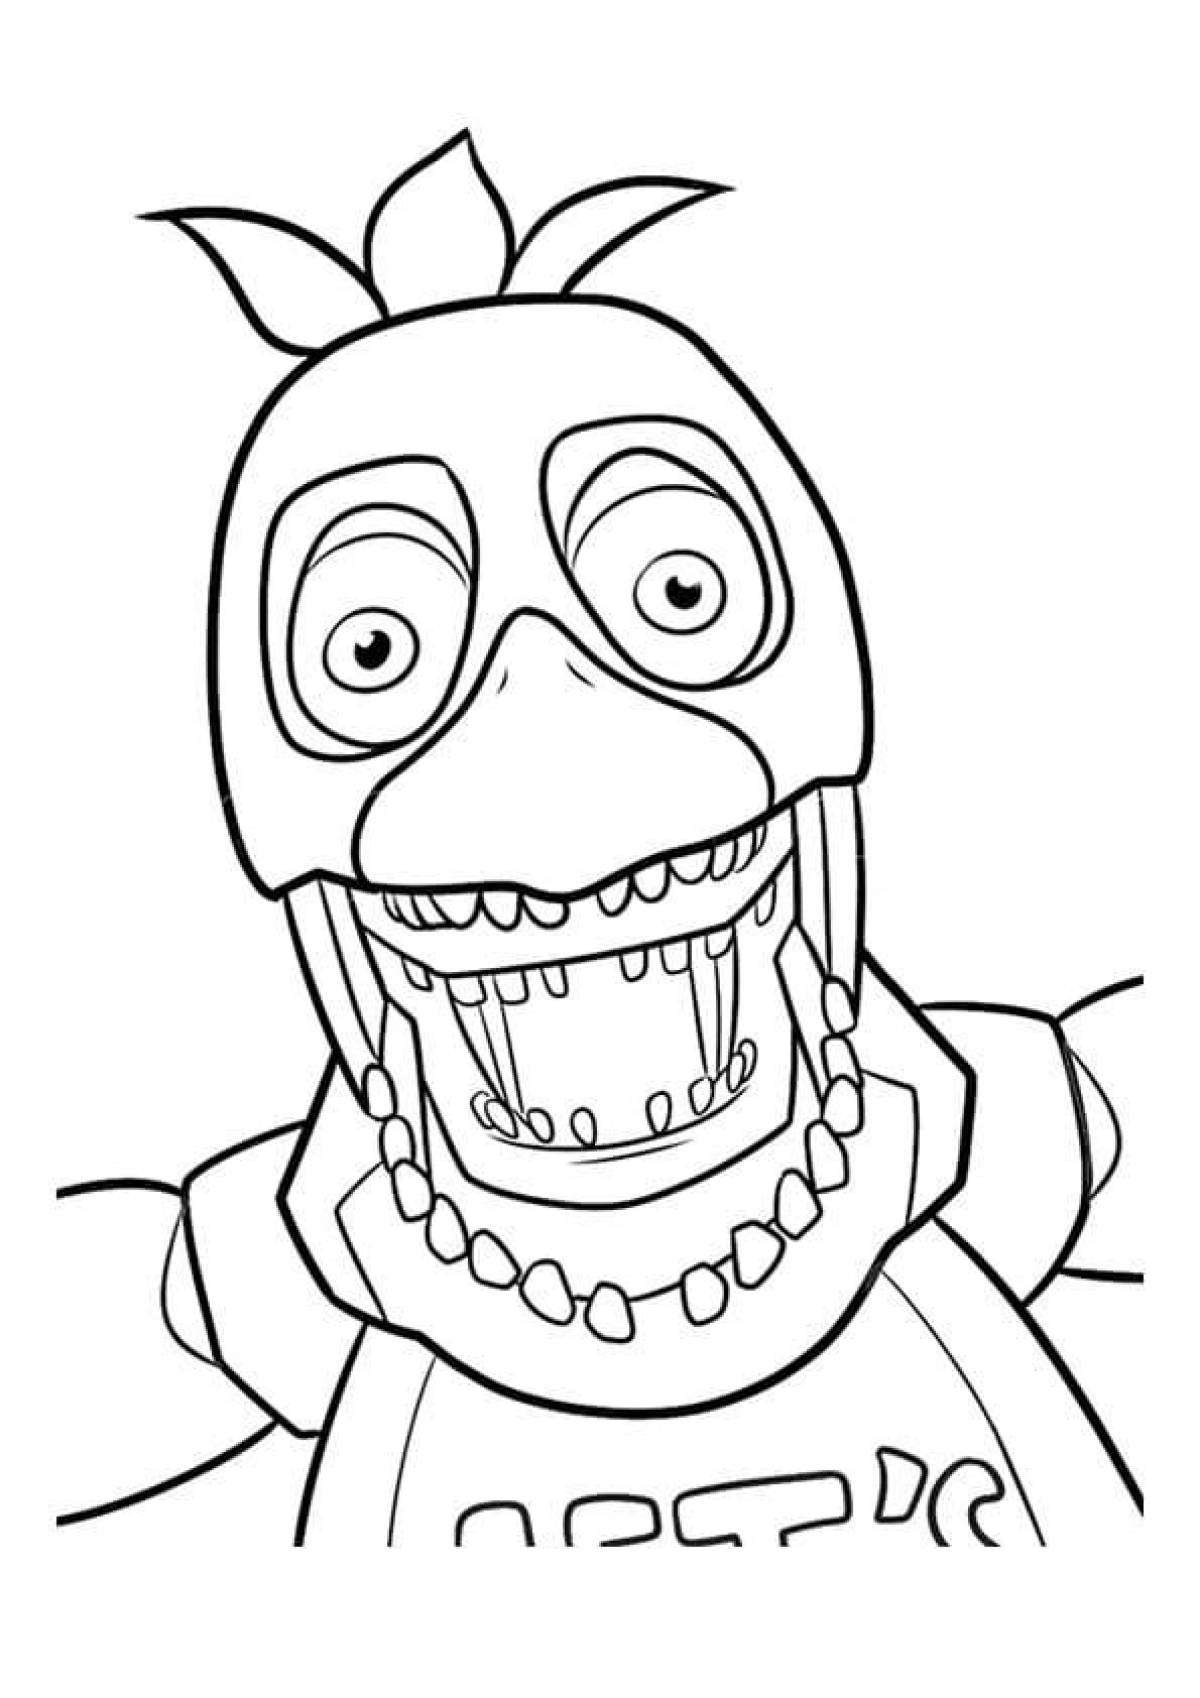 Chica's amazing coloring page